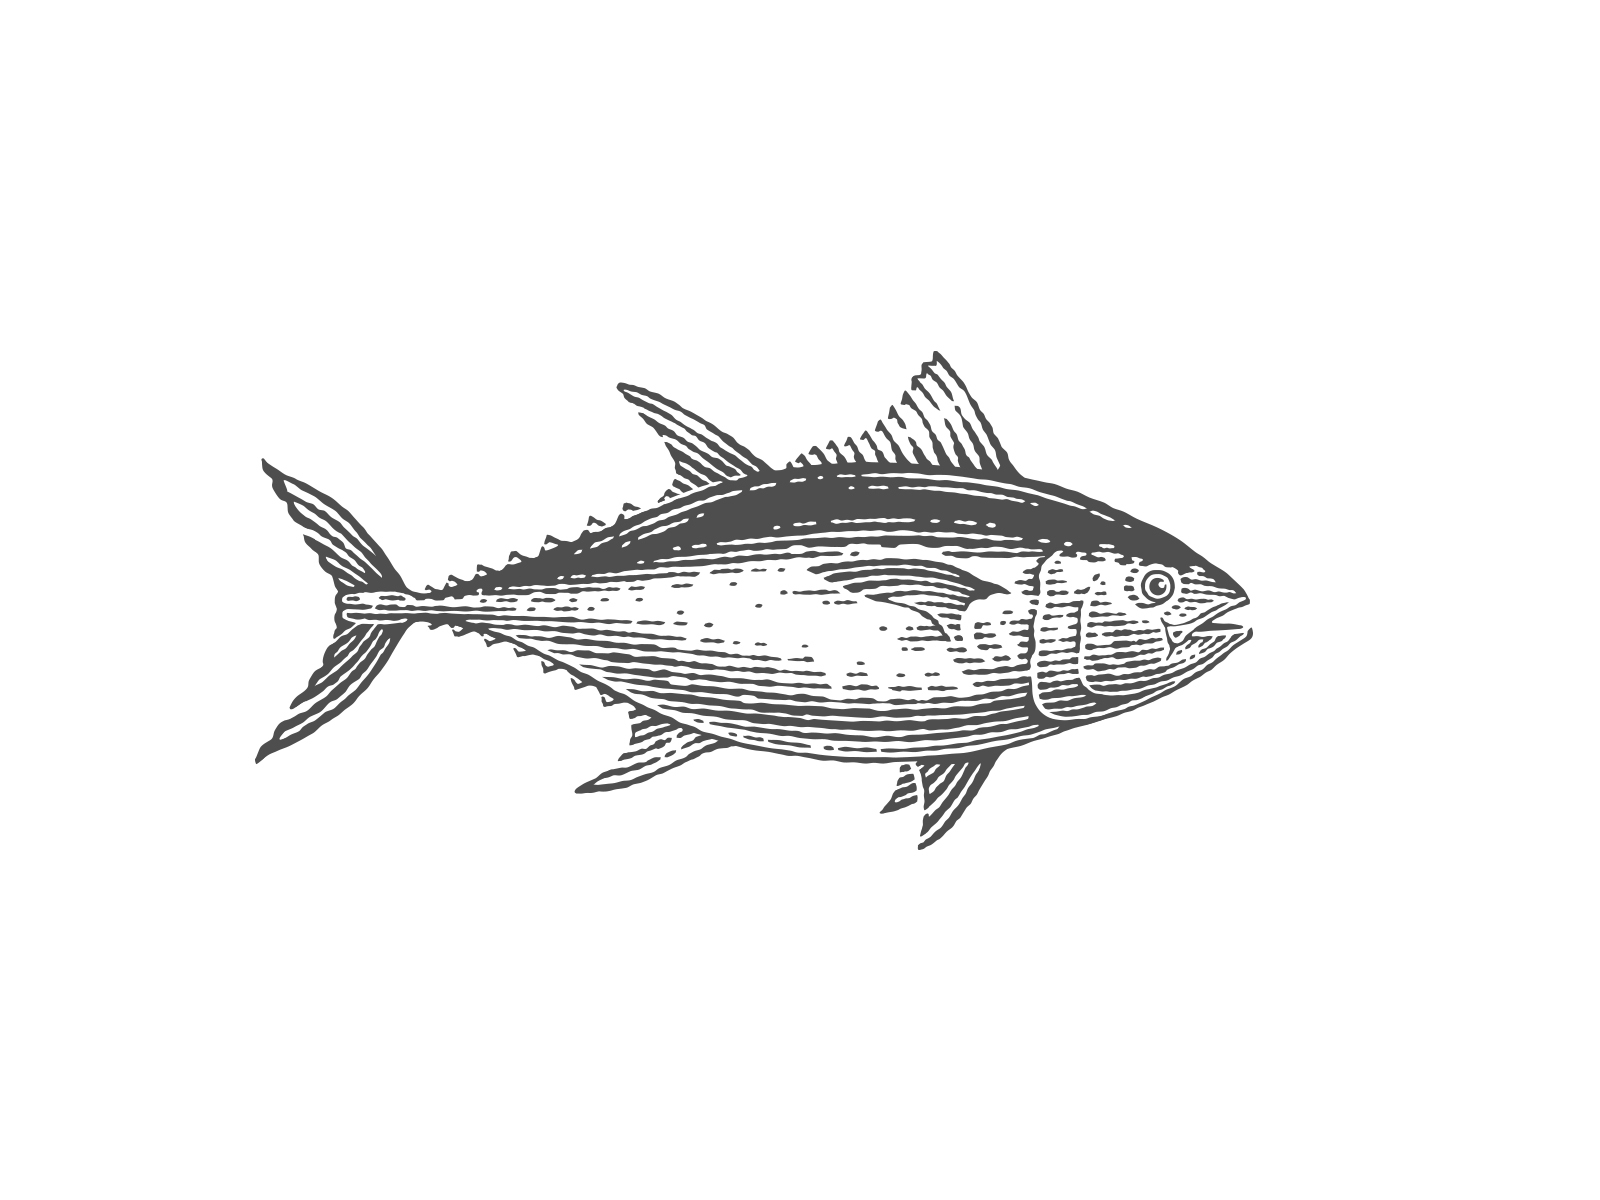 How to draw a Tuna Fish easy Step by step - YouTube